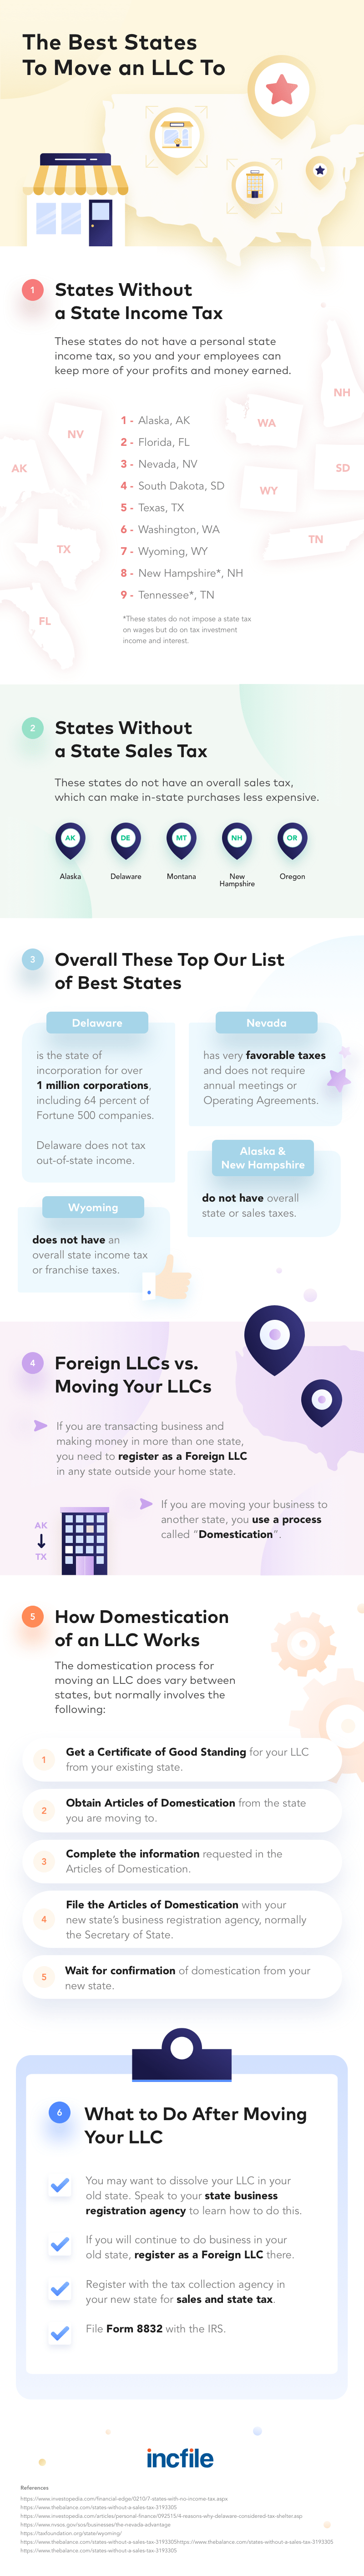 The best states for moving your LLC infographic